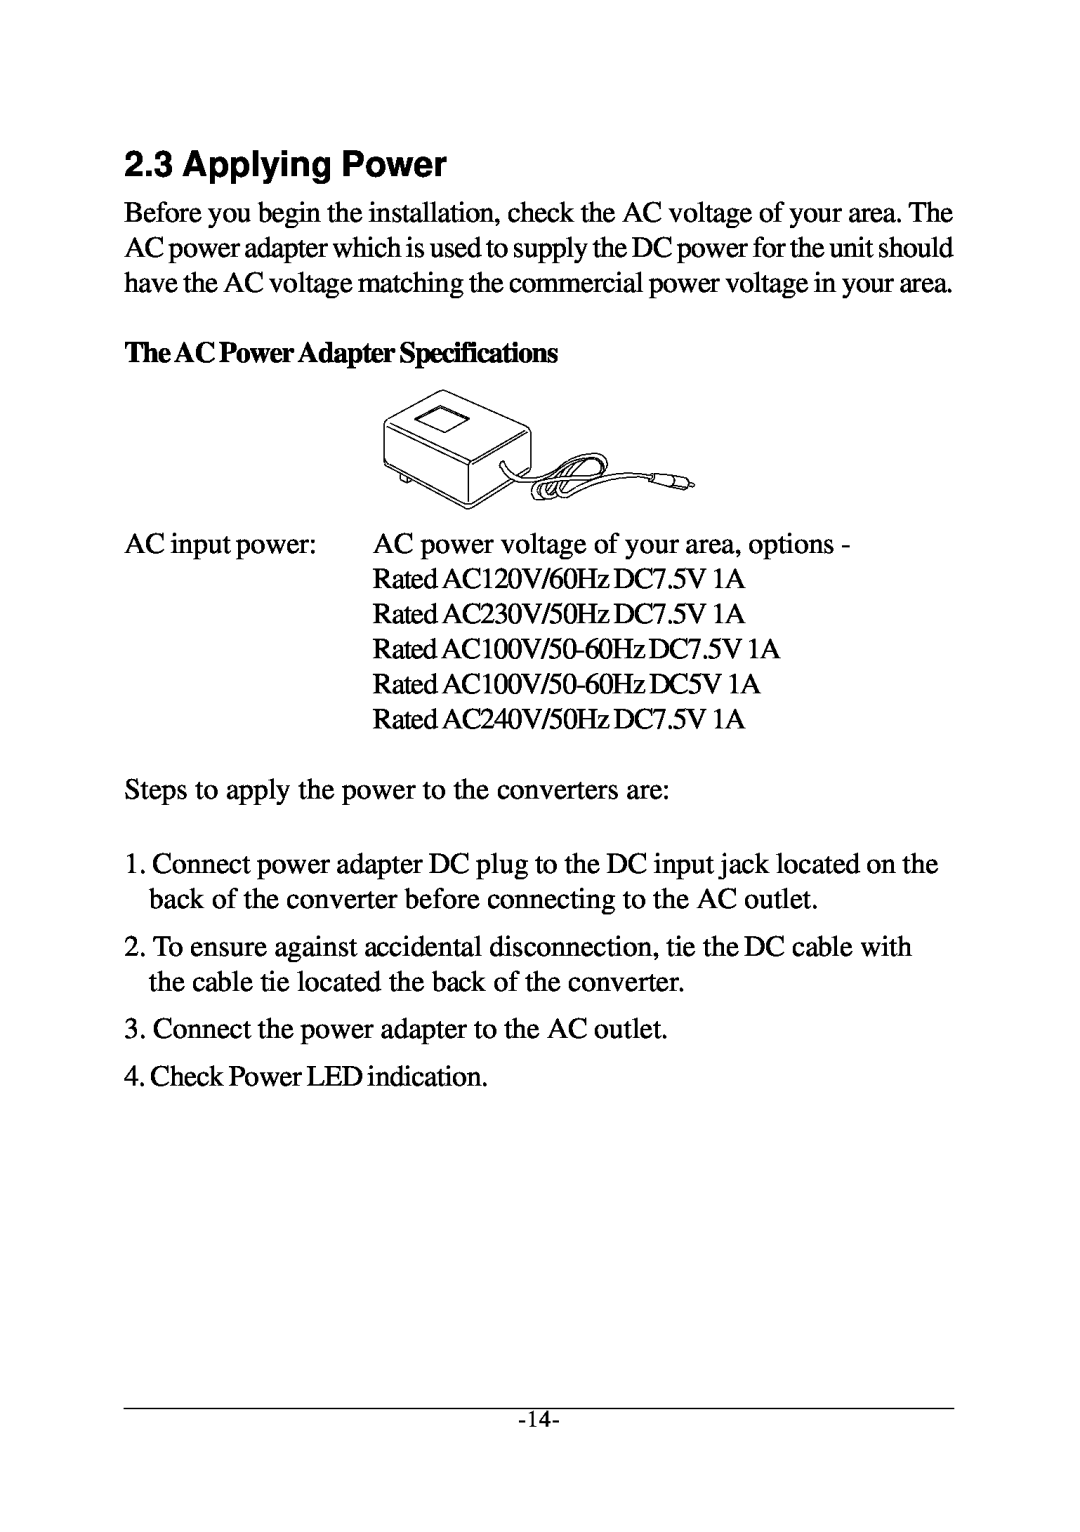 KTI Networks KC-300D manual Applying Power, The AC Power Adapter Specifications 